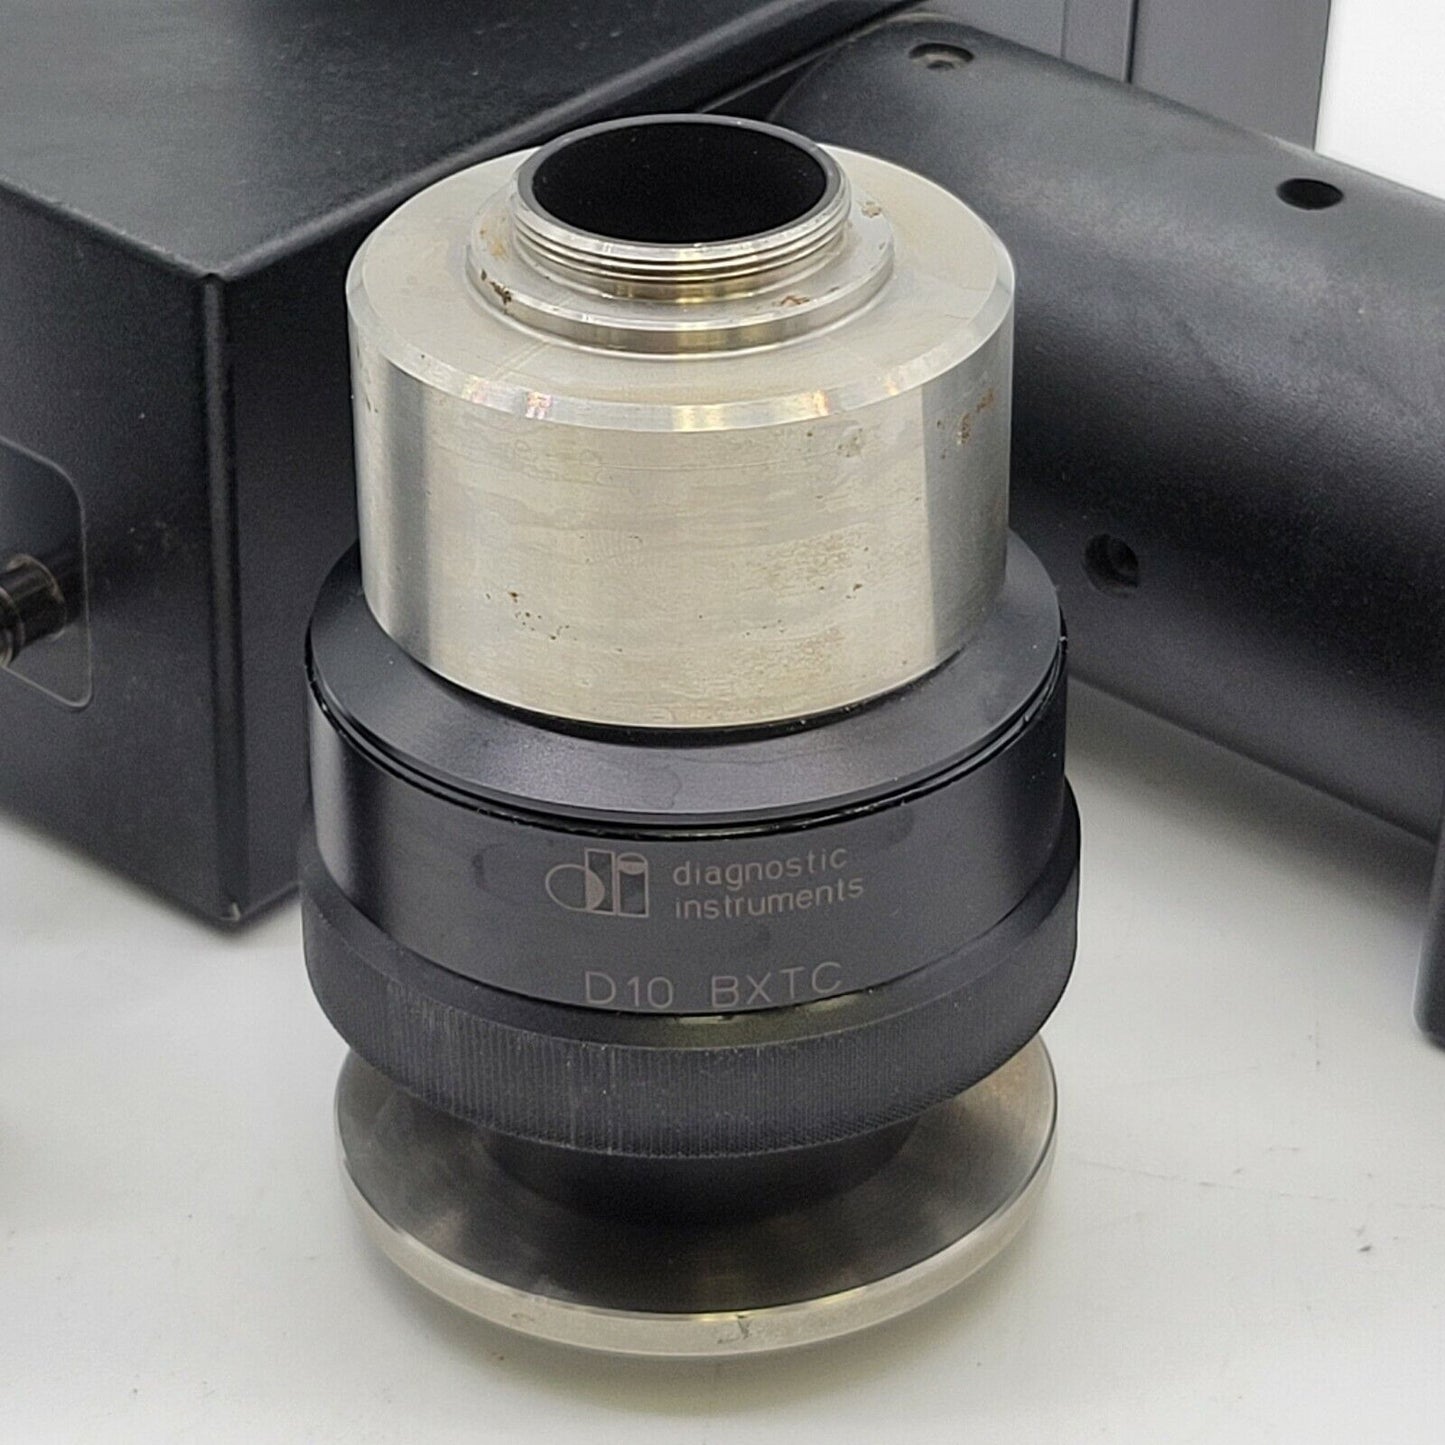 Olympus Microscope U-DPT-2 Dual Photo Port with Camera Adapters for BX Series - microscopemarketplace